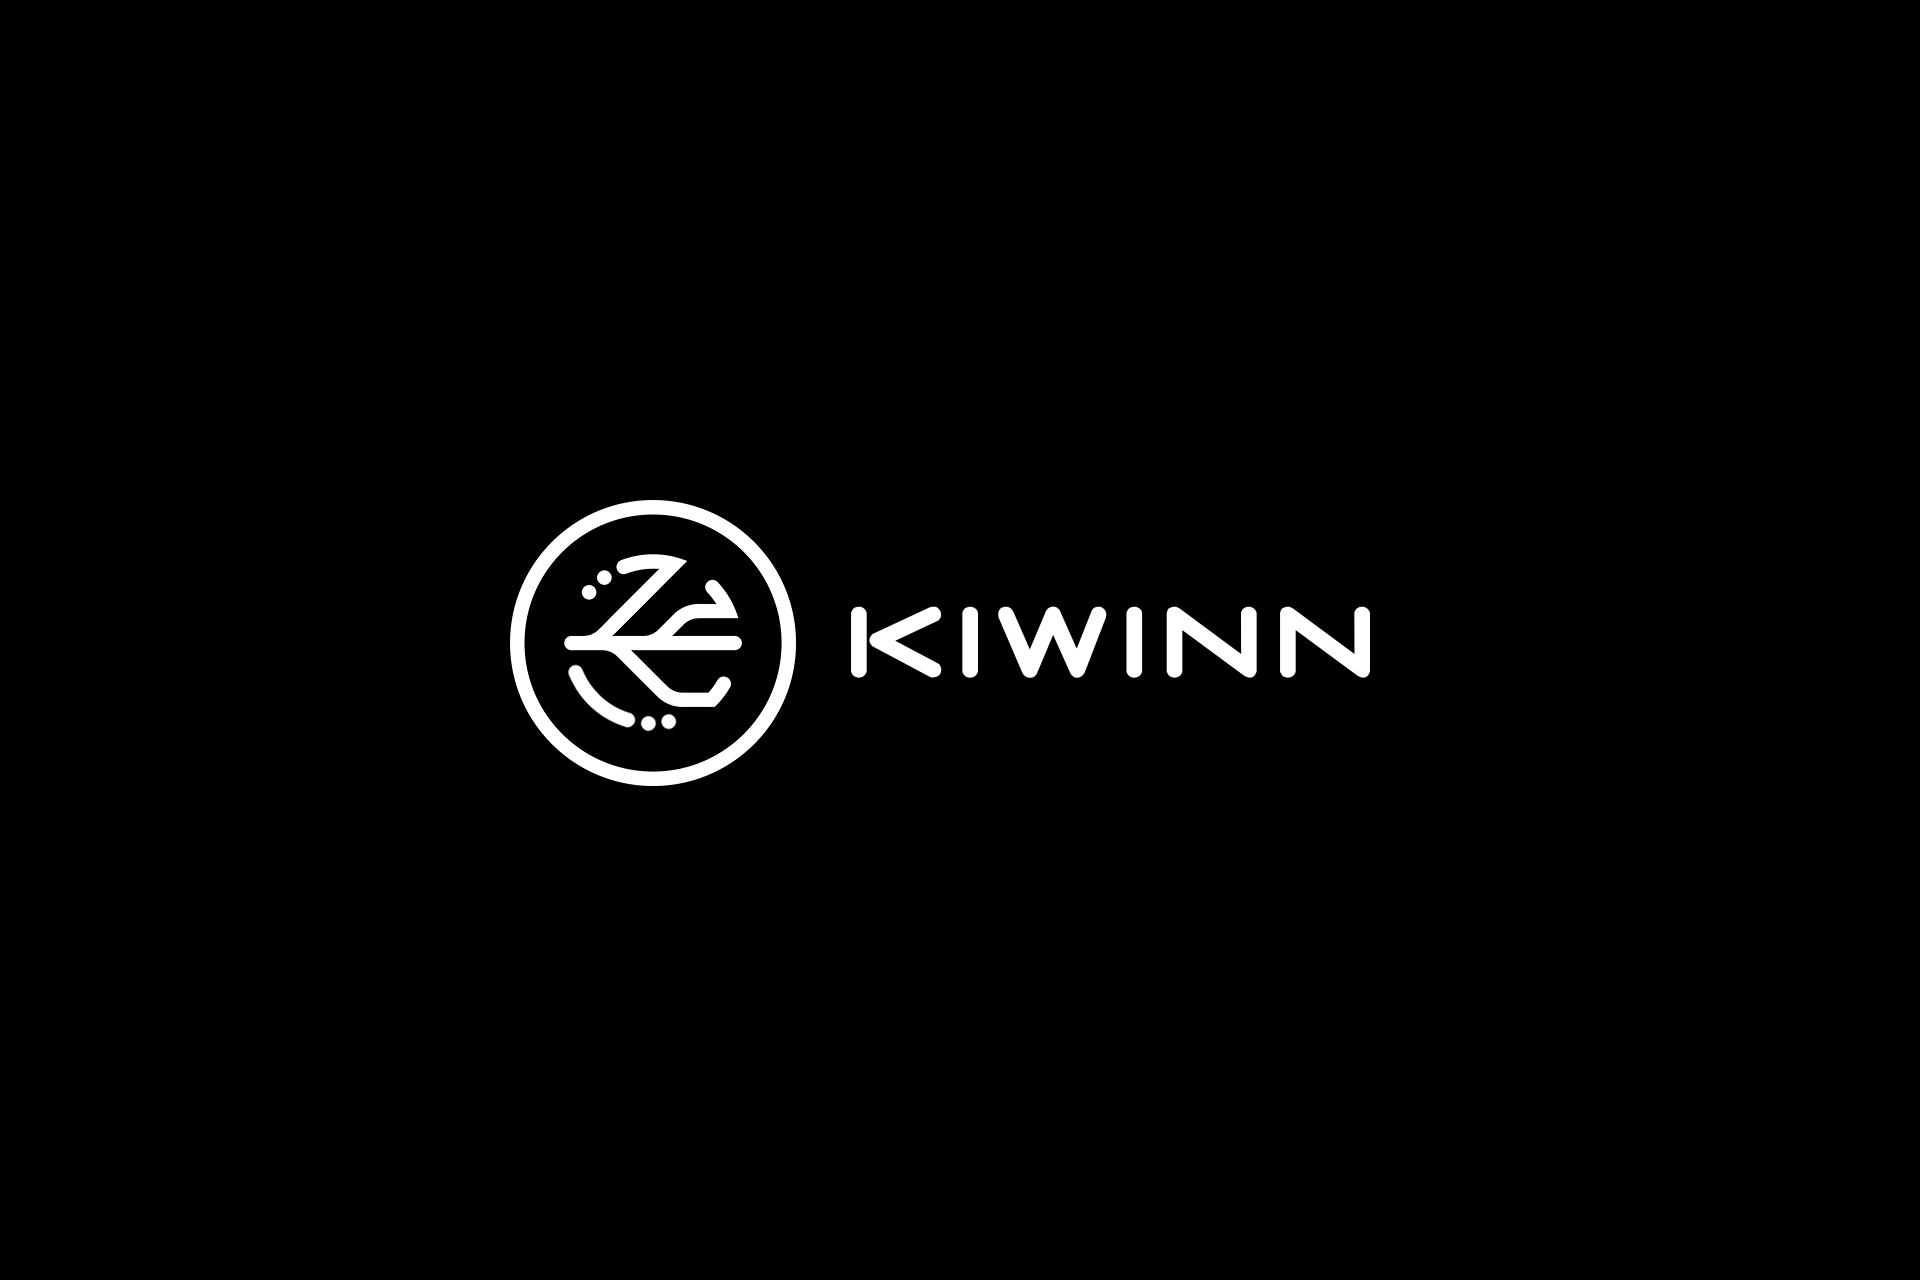 Logo for the Canadian brand of telephone and computer accessories Kiwinn